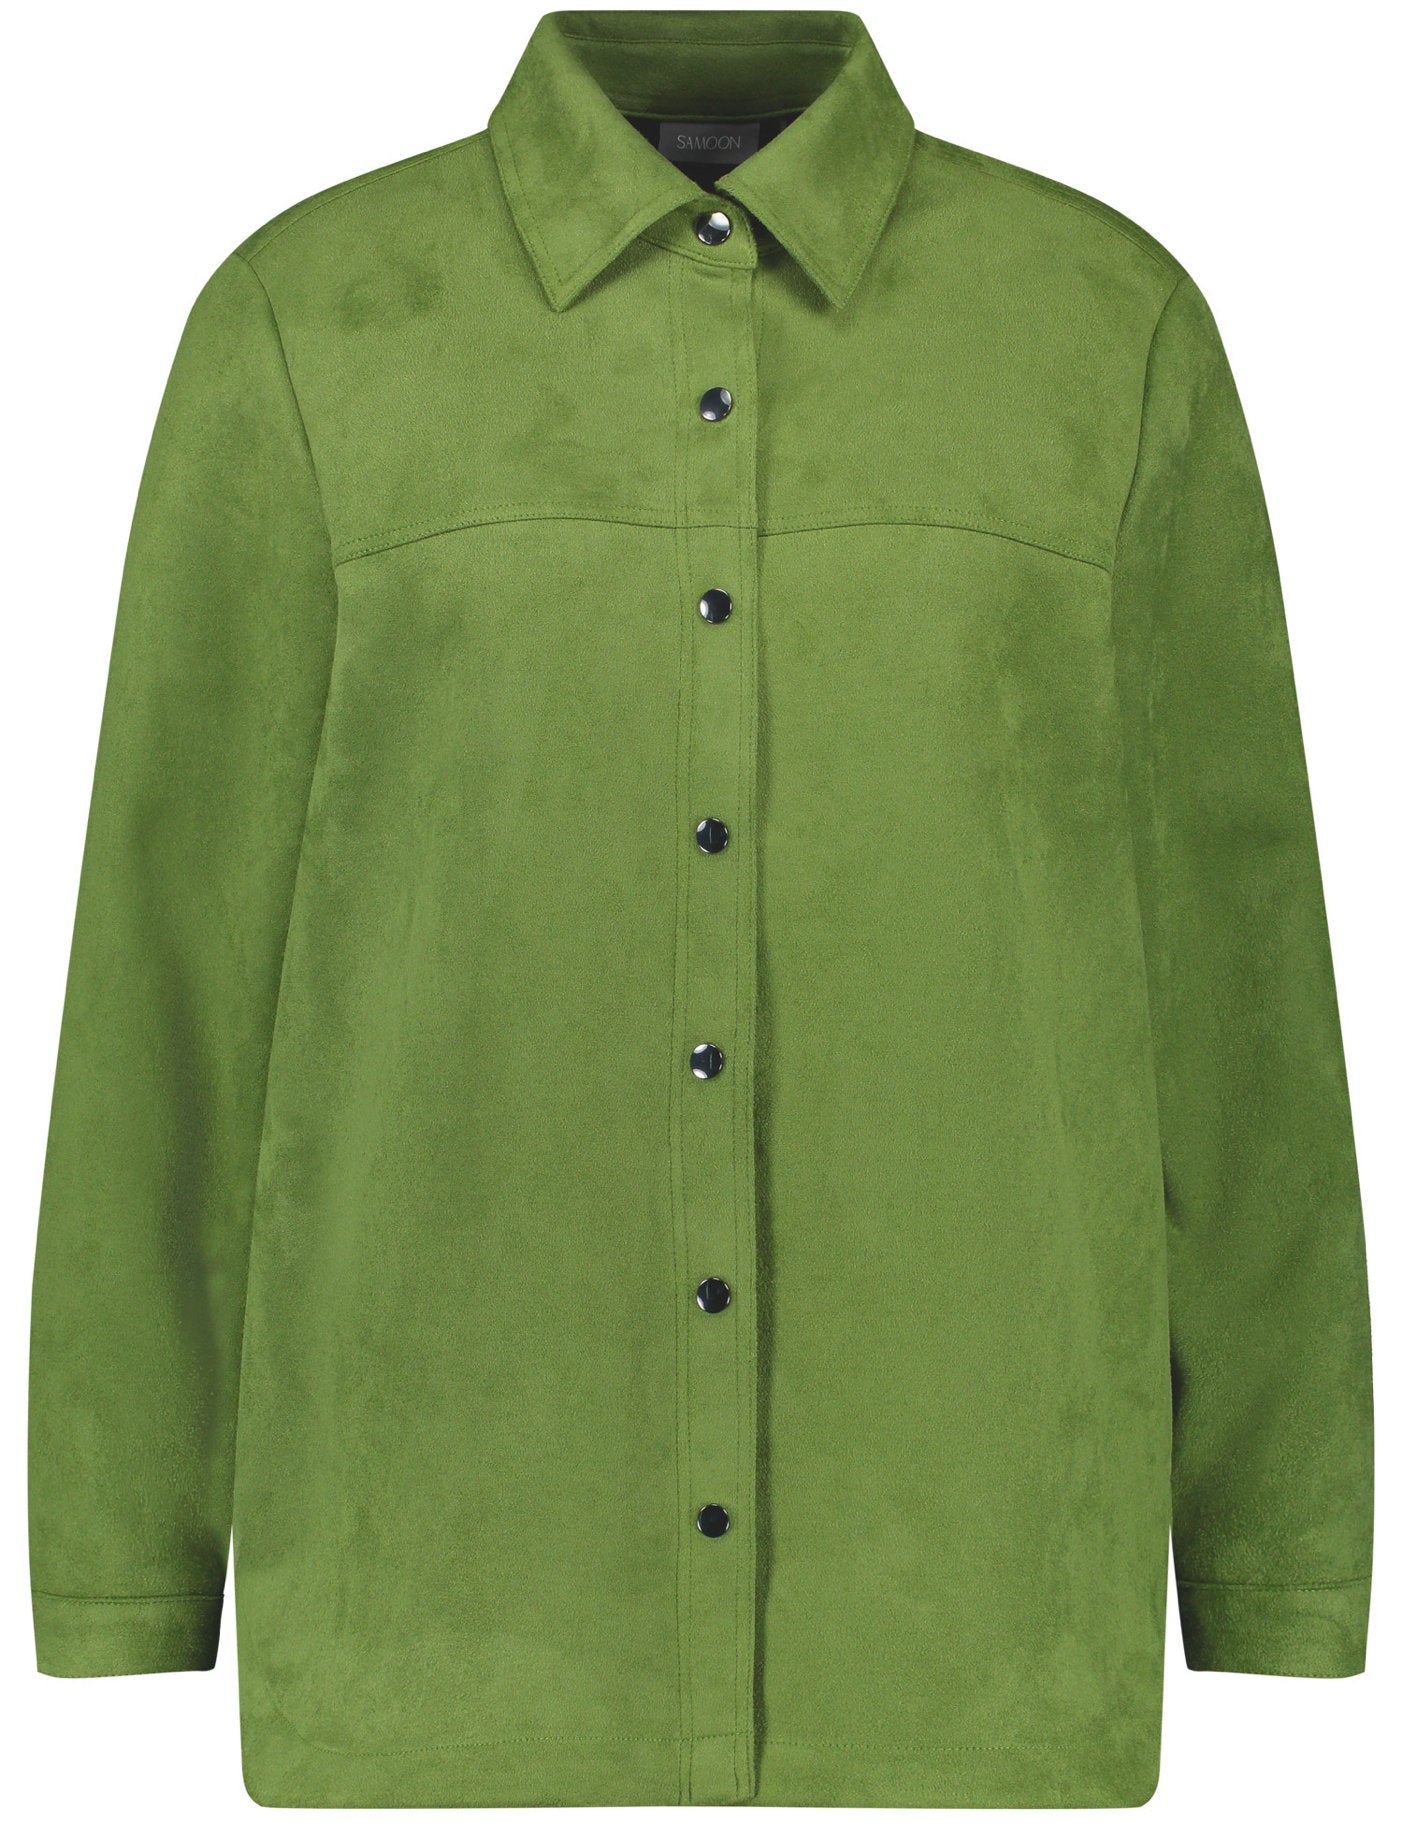 Casual Overshirt In A Velour Look_330210-21324_5570_02